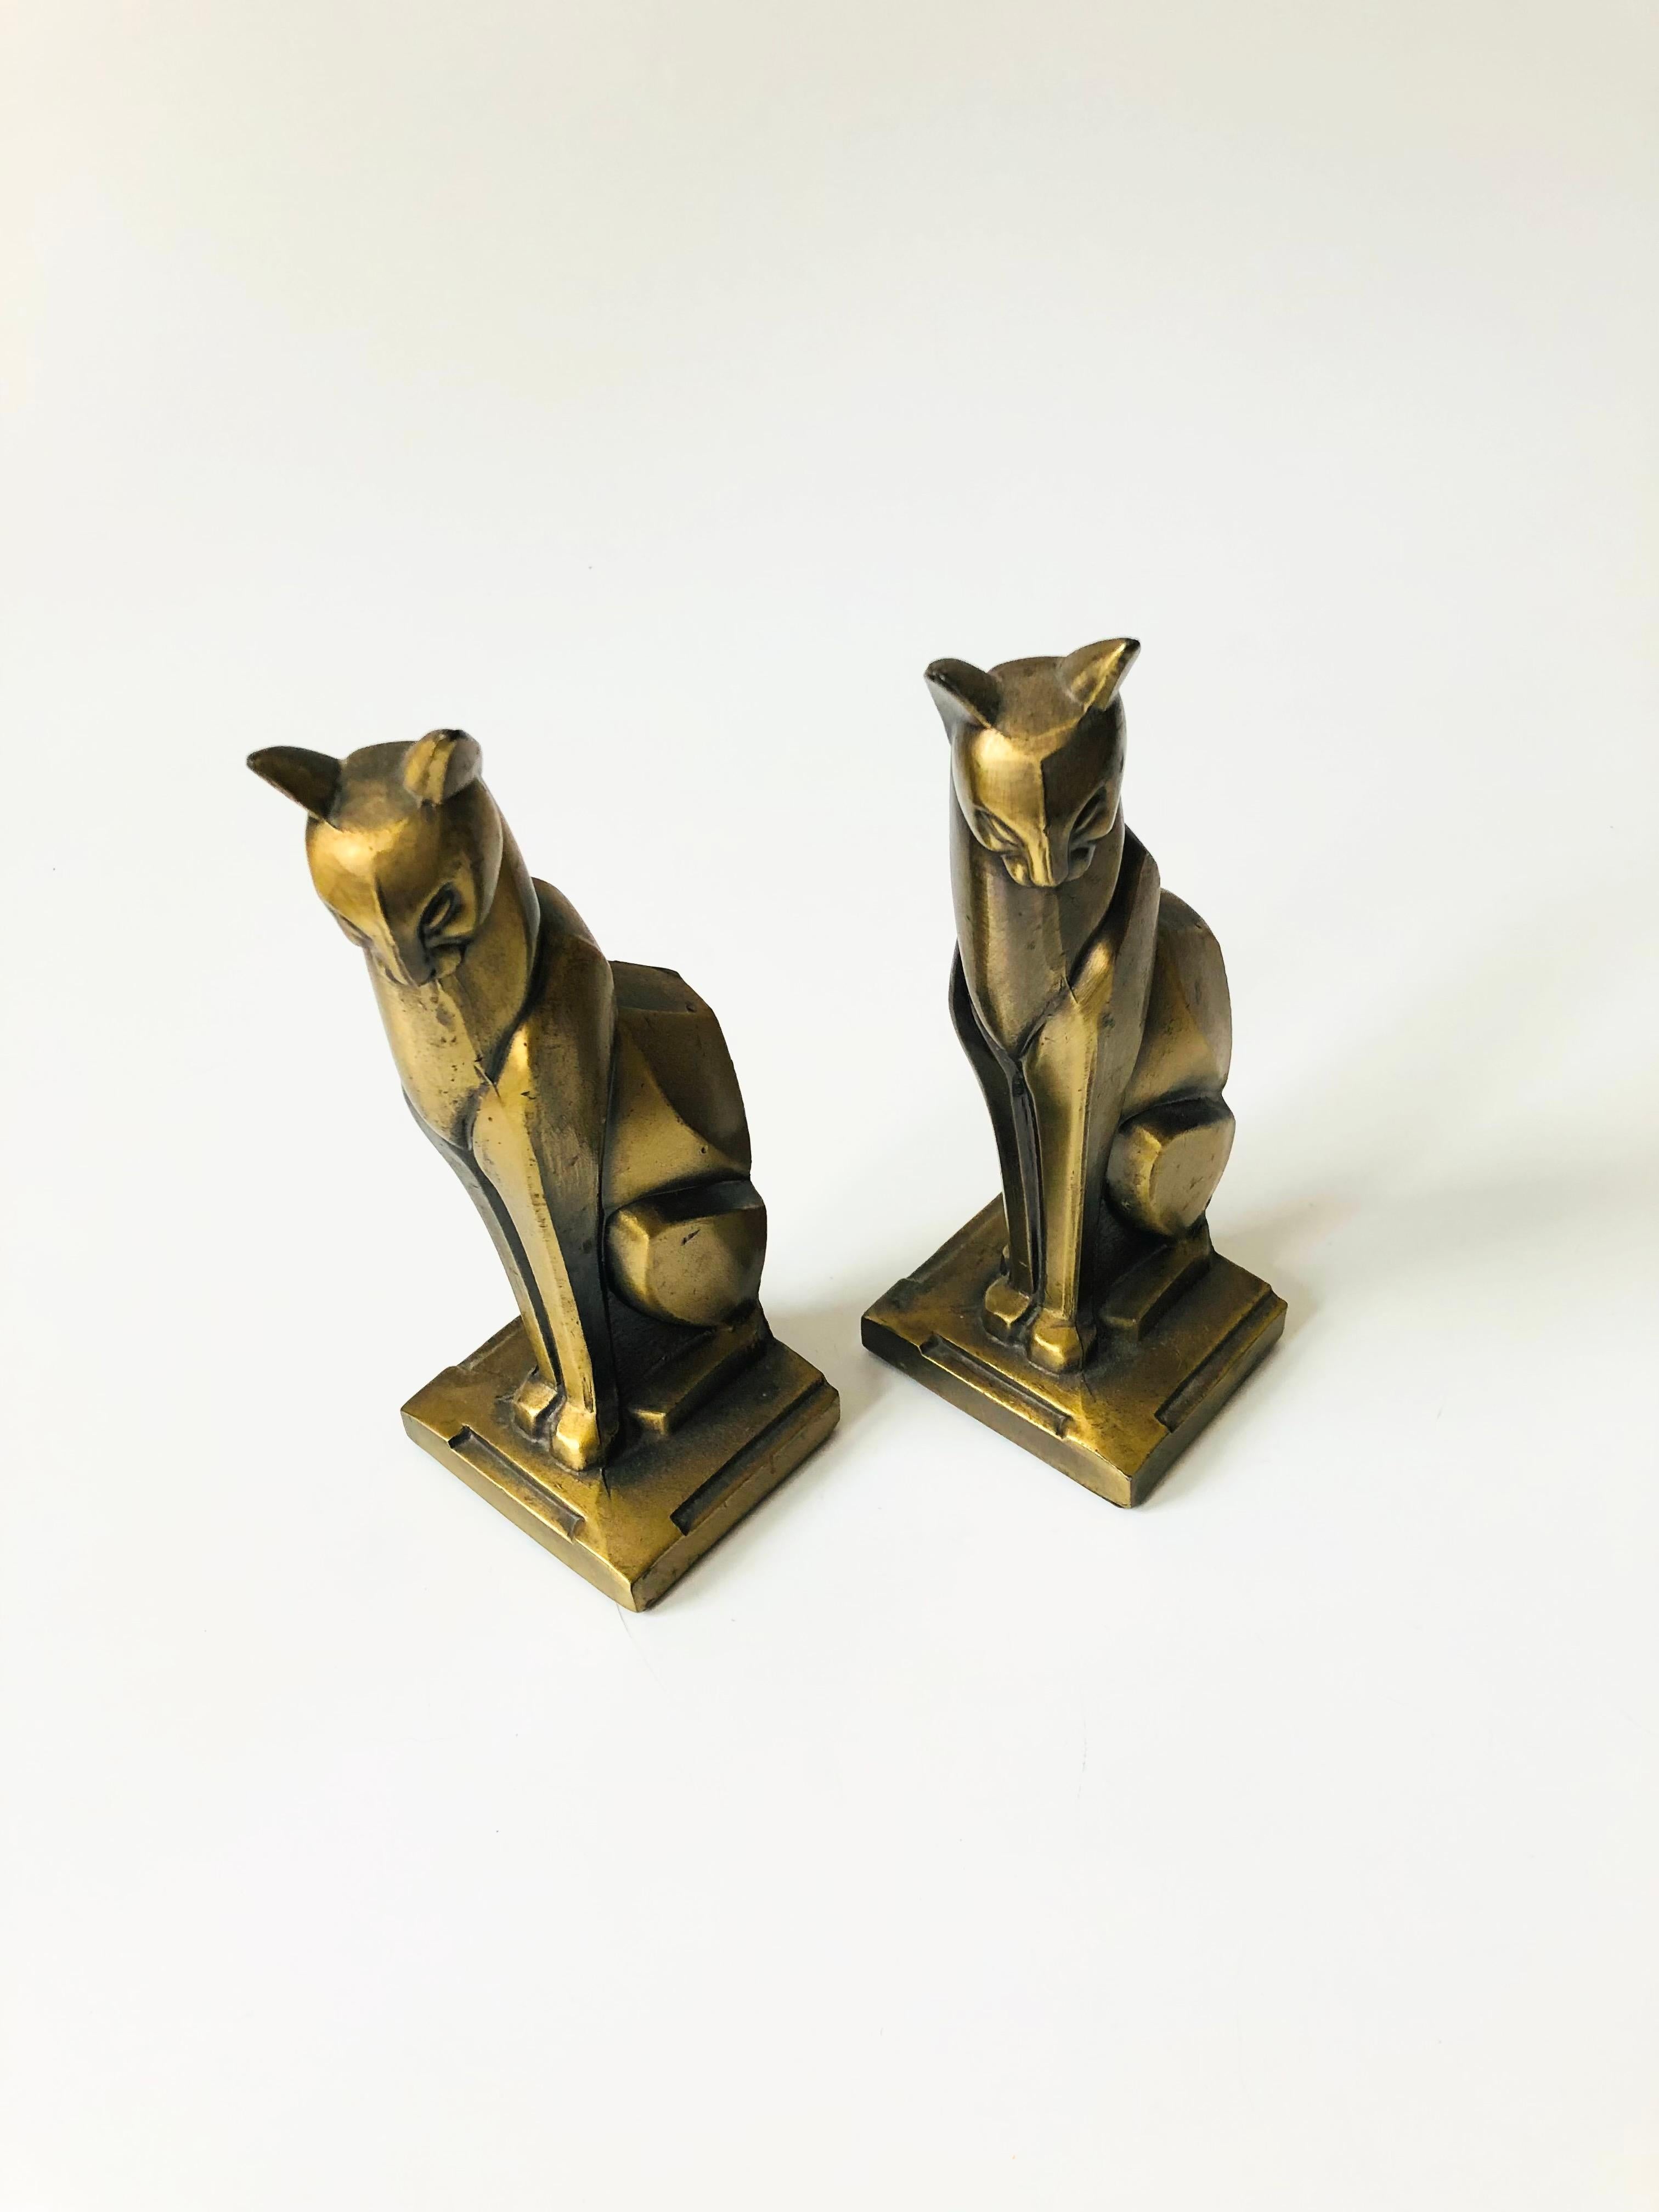 A wonderful pair of vintage Art Deco cat bookends. Made out of cast metal that has been given a gold tone finish. Darkened patina in the crevices. Wonderful angular stylized detailing to the cats. Felted bottoms.
 